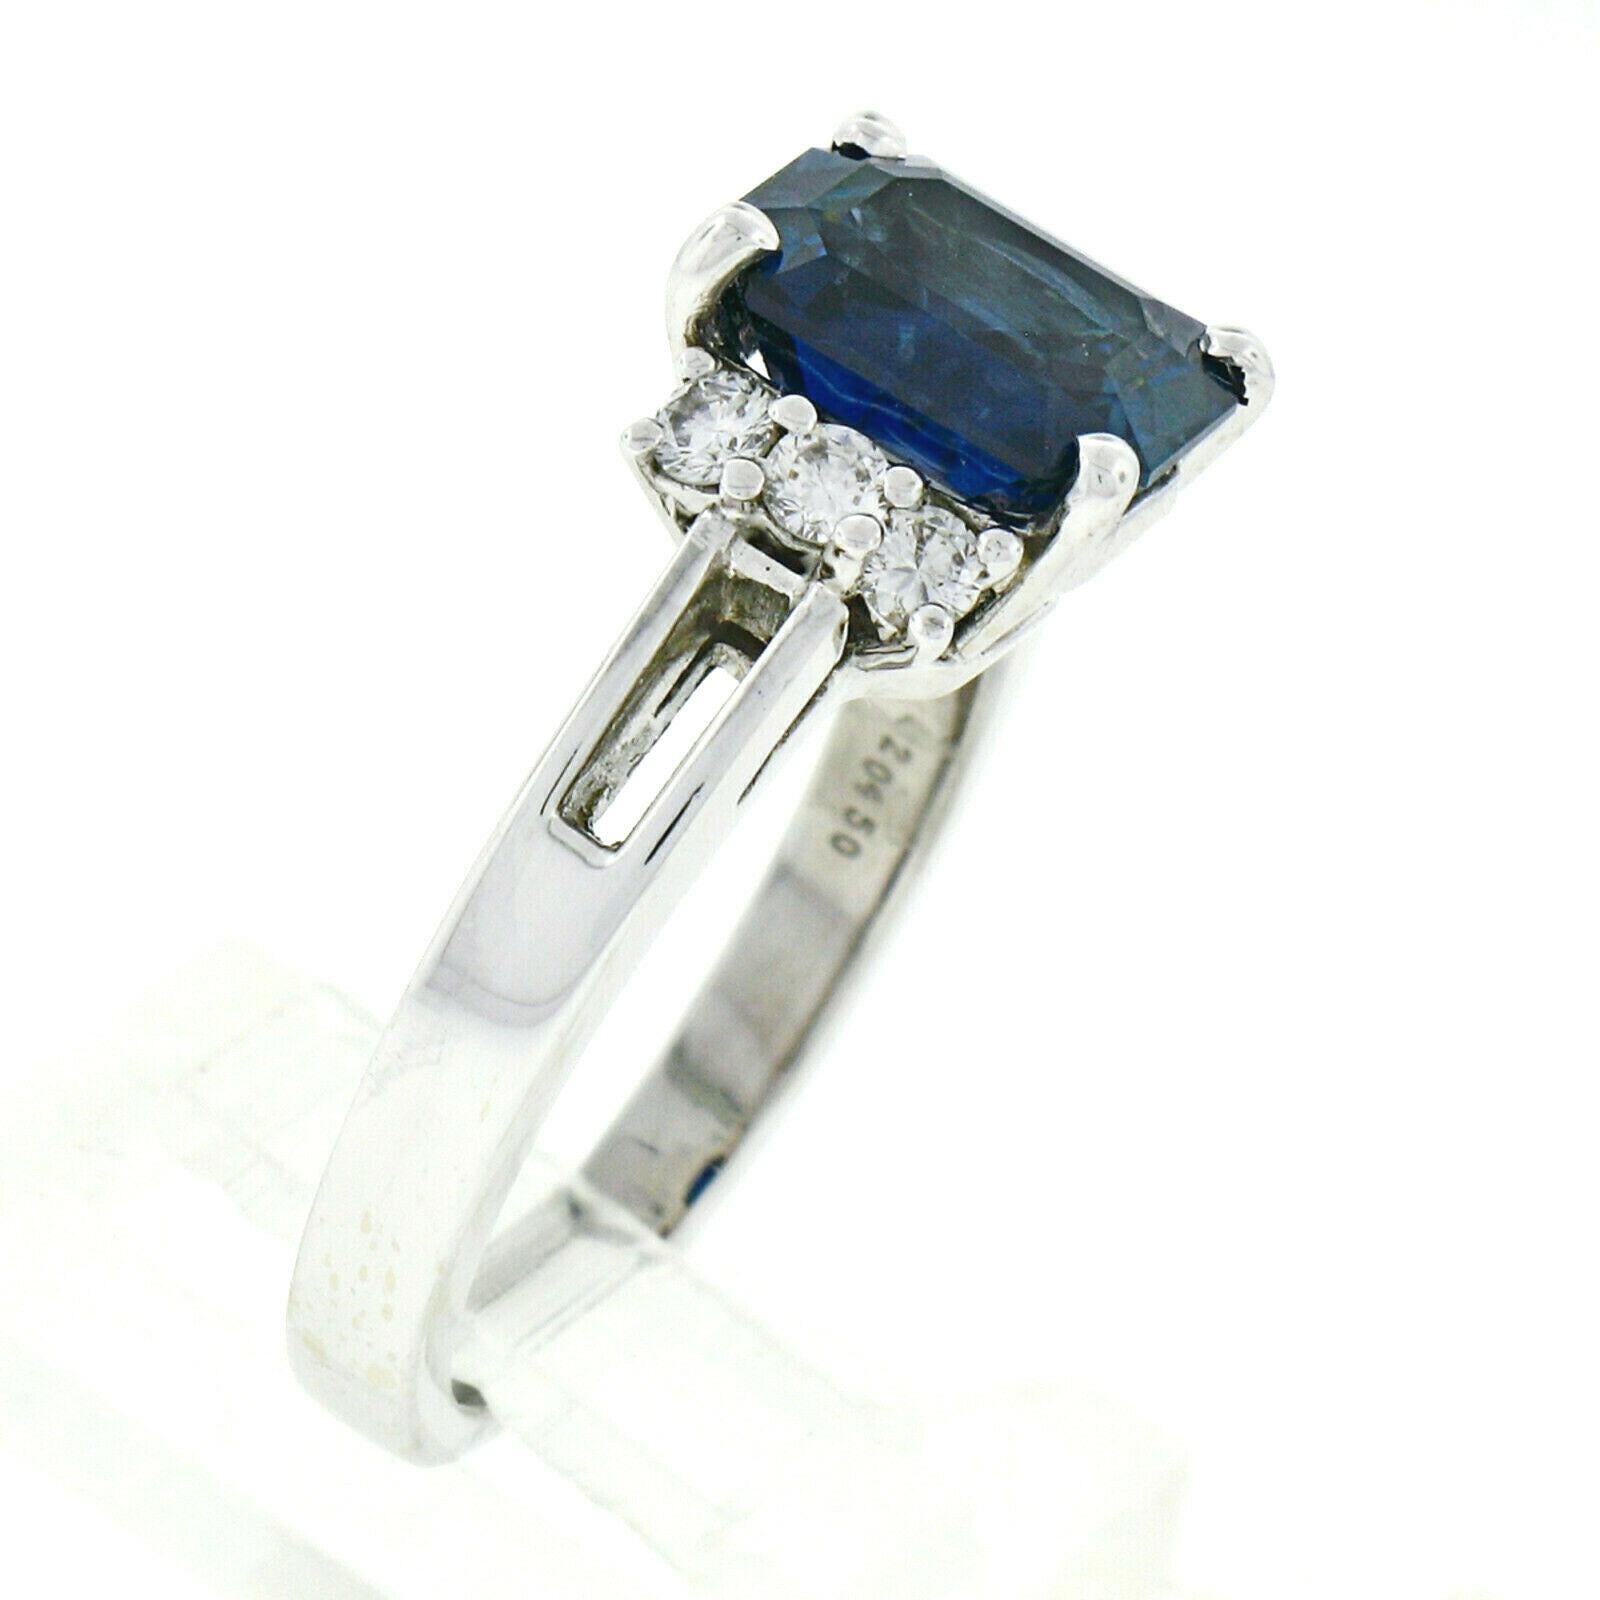 Kurt Wayne 18k Gold 3.12ct AGL Emerald Cut Blue Sapphire & Round Diamond Ring In Excellent Condition For Sale In Montclair, NJ